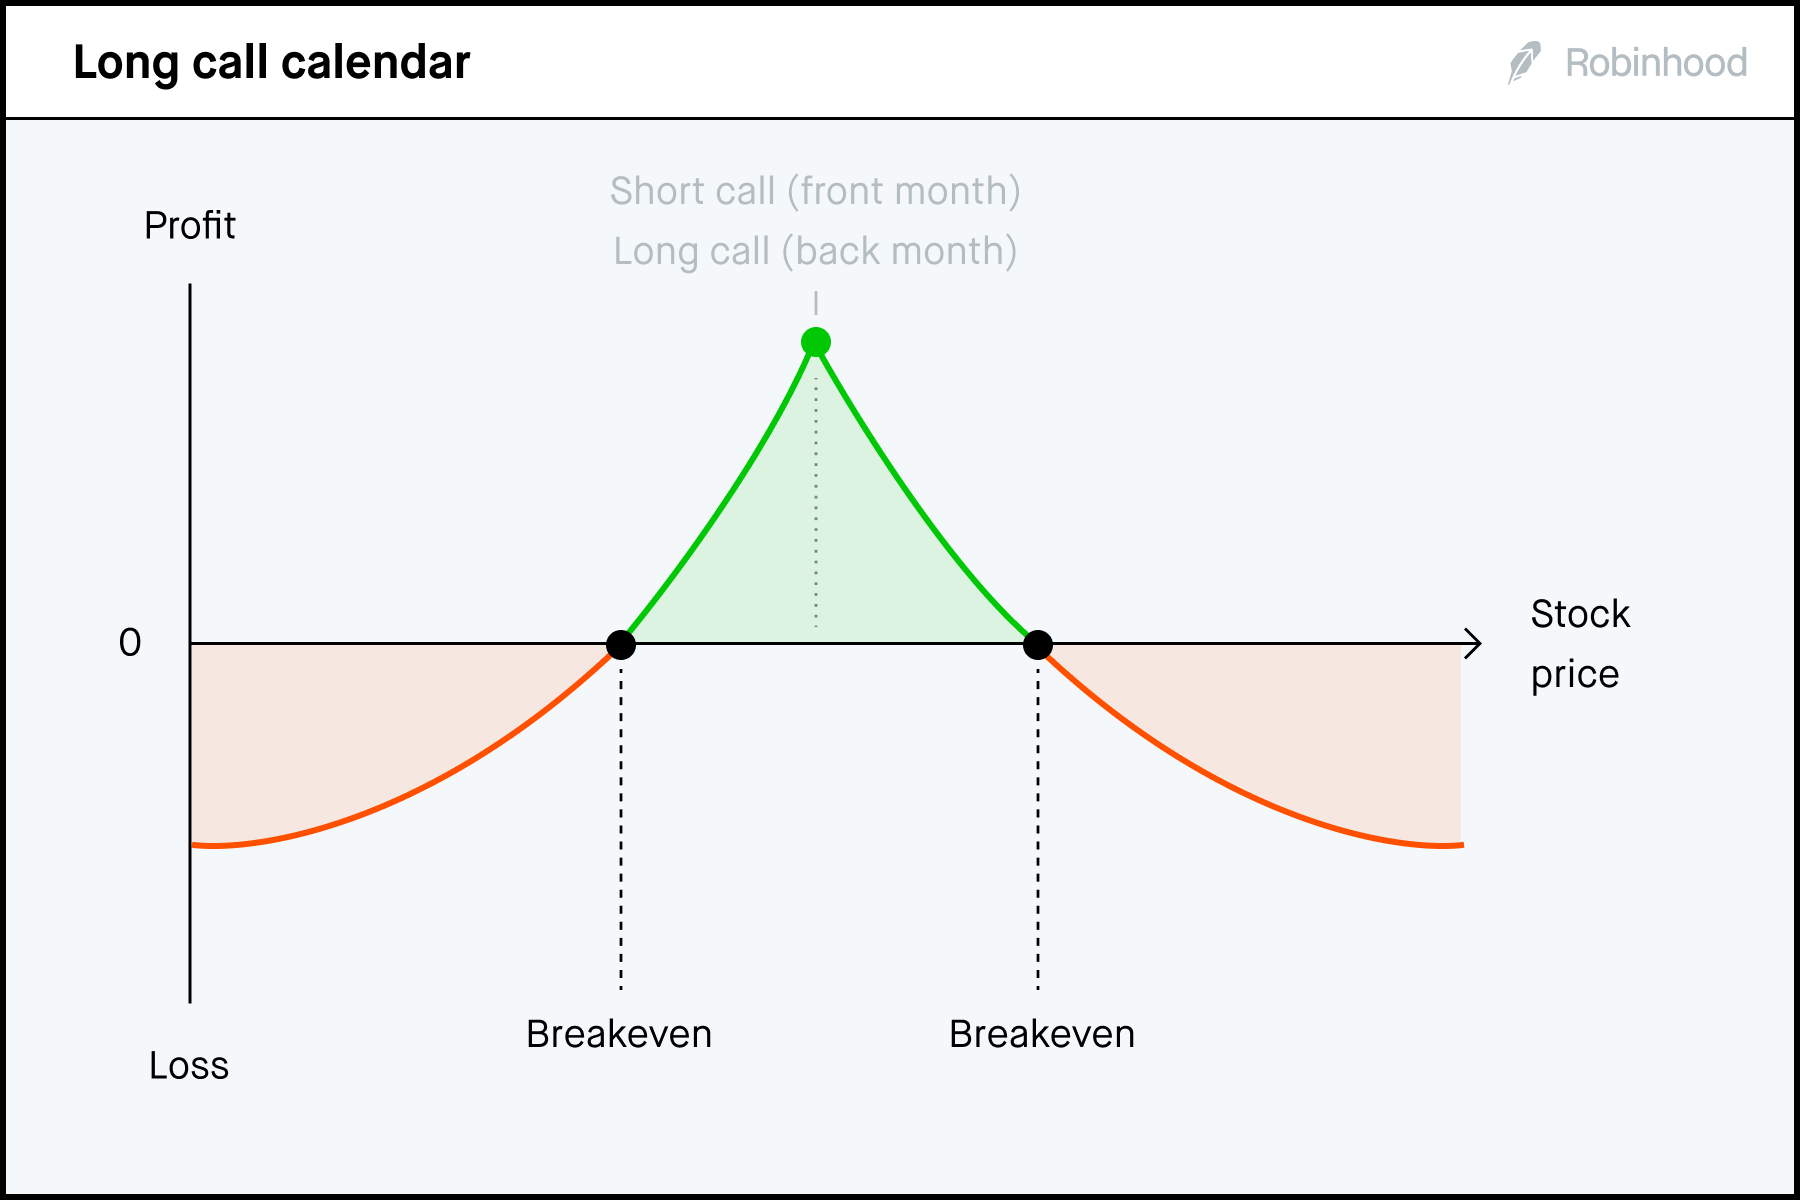 Calendar Spreads in Futures and Options Trading Explained